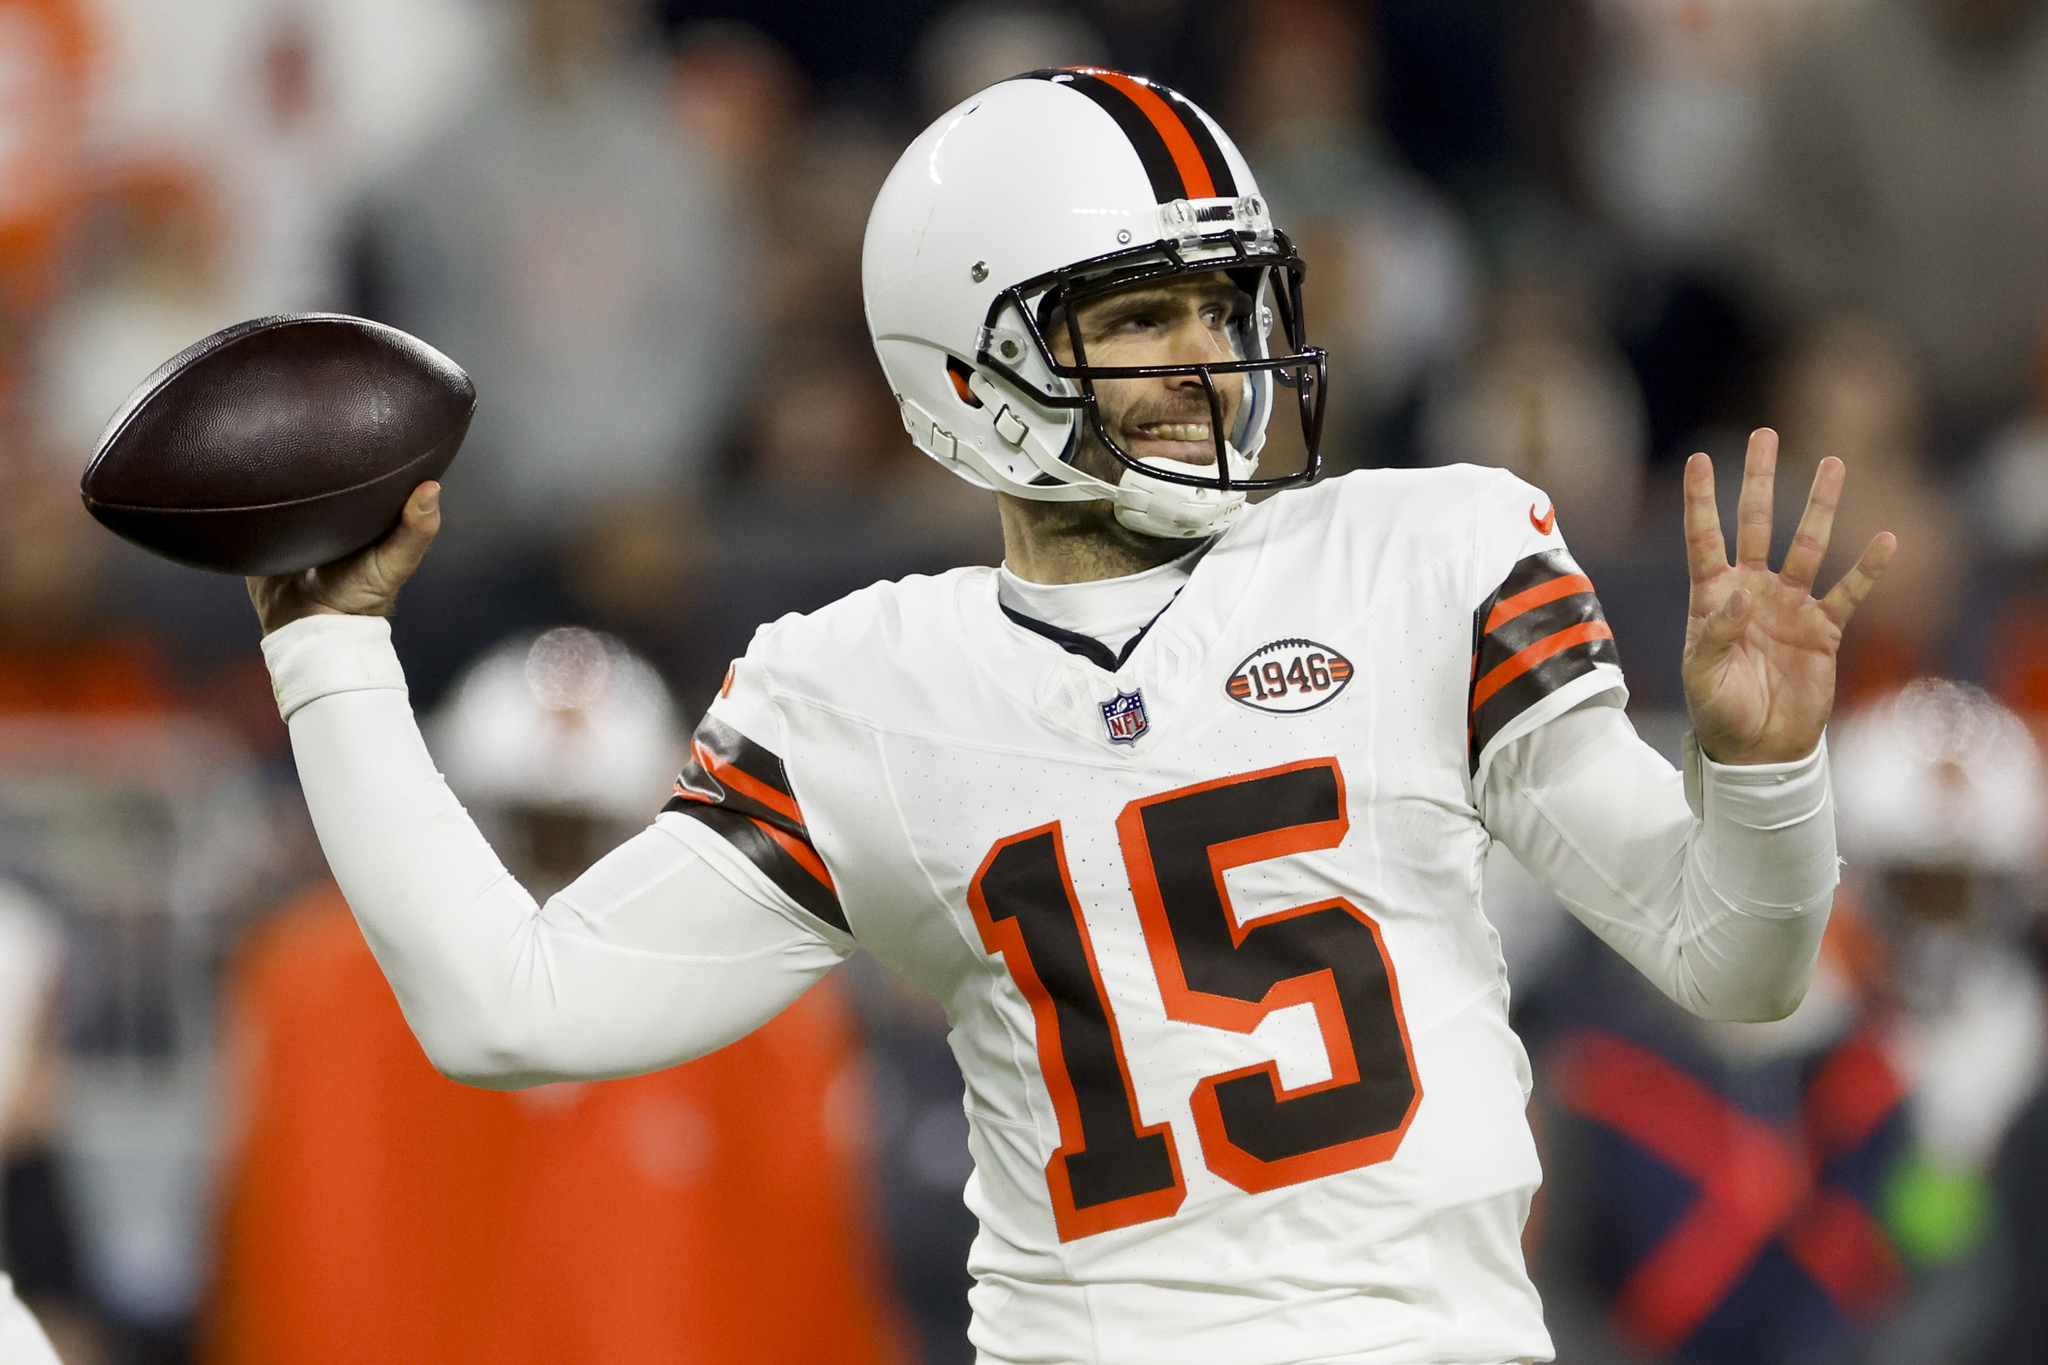 Cleveland Browns quarterback Joe Flacco passes against the New York Jets